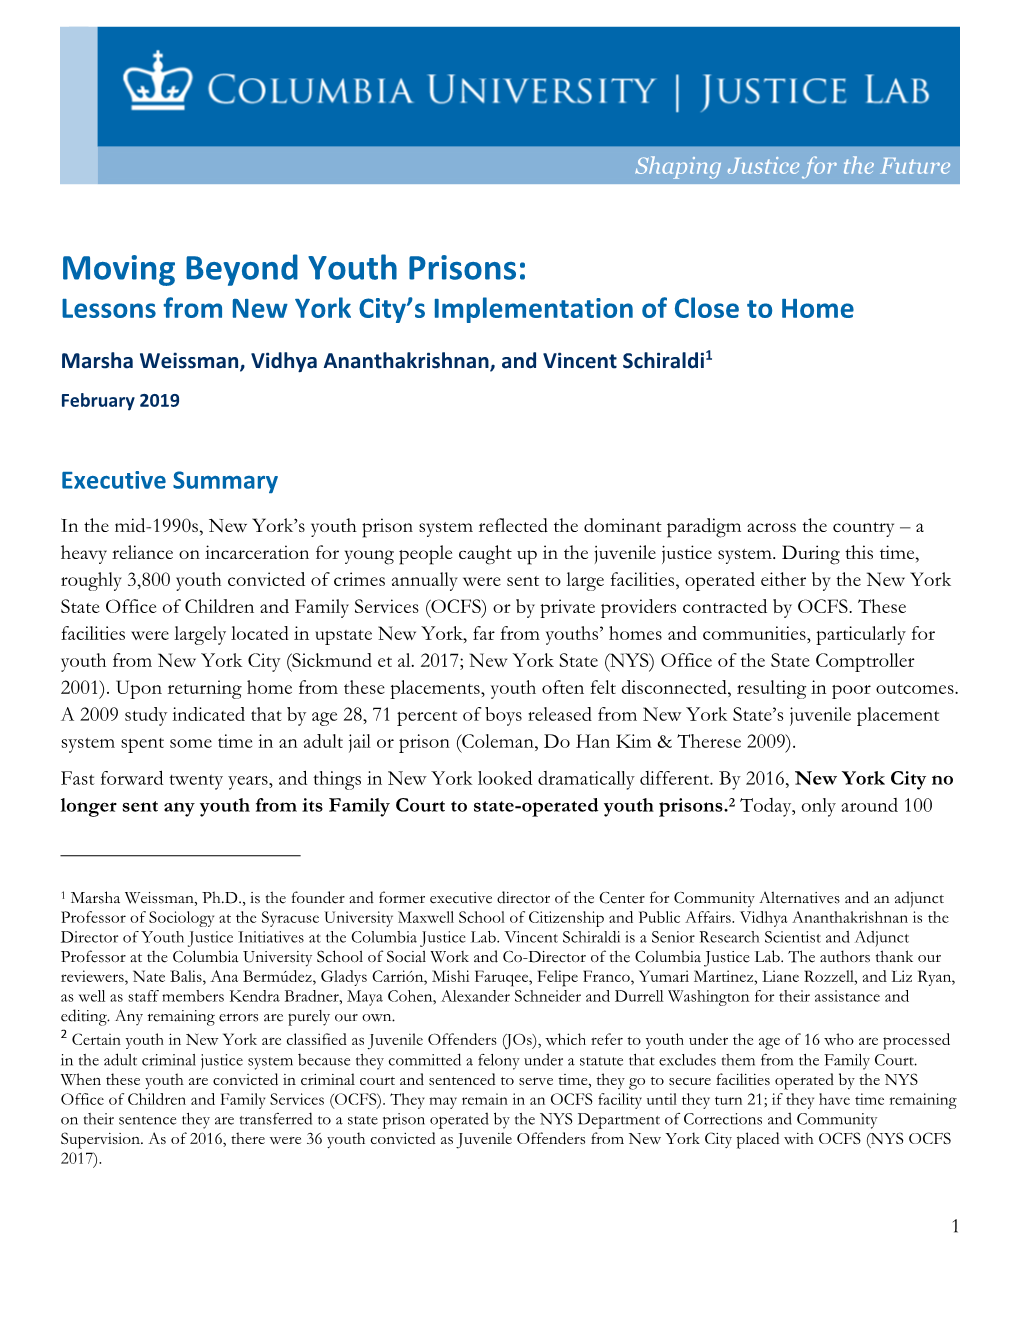 Moving Beyond Youth Prisons: Lessons from New York City’S Implementation of Close to Home